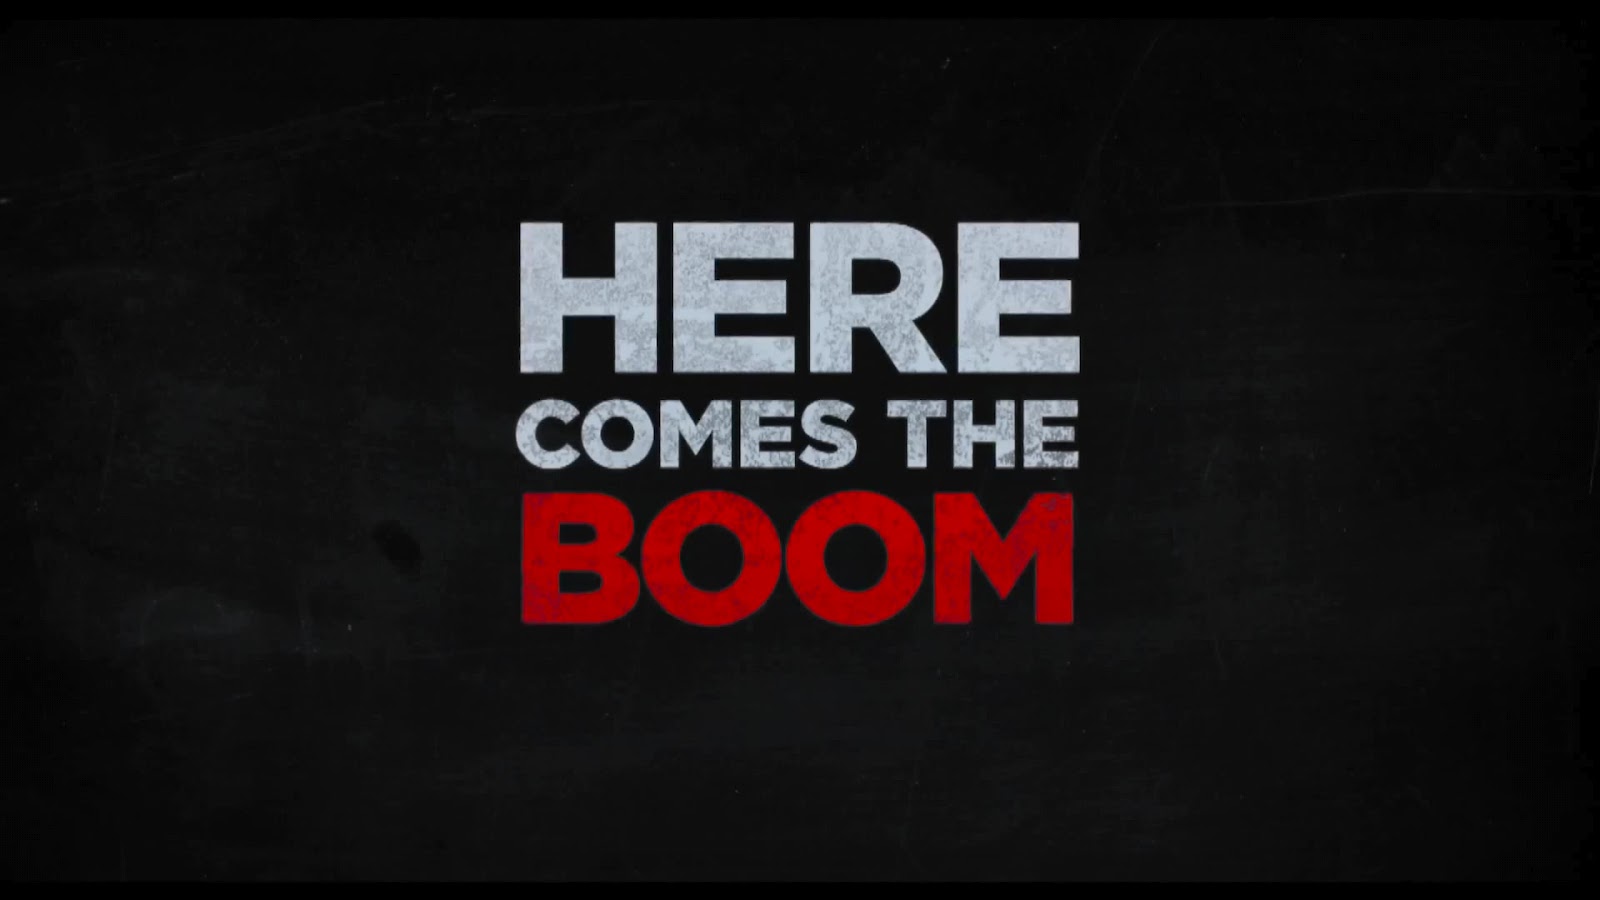 Here comes the Boom. Here comes the Boom laugh. Holly Boom. I High too Boom is the think. Boom here